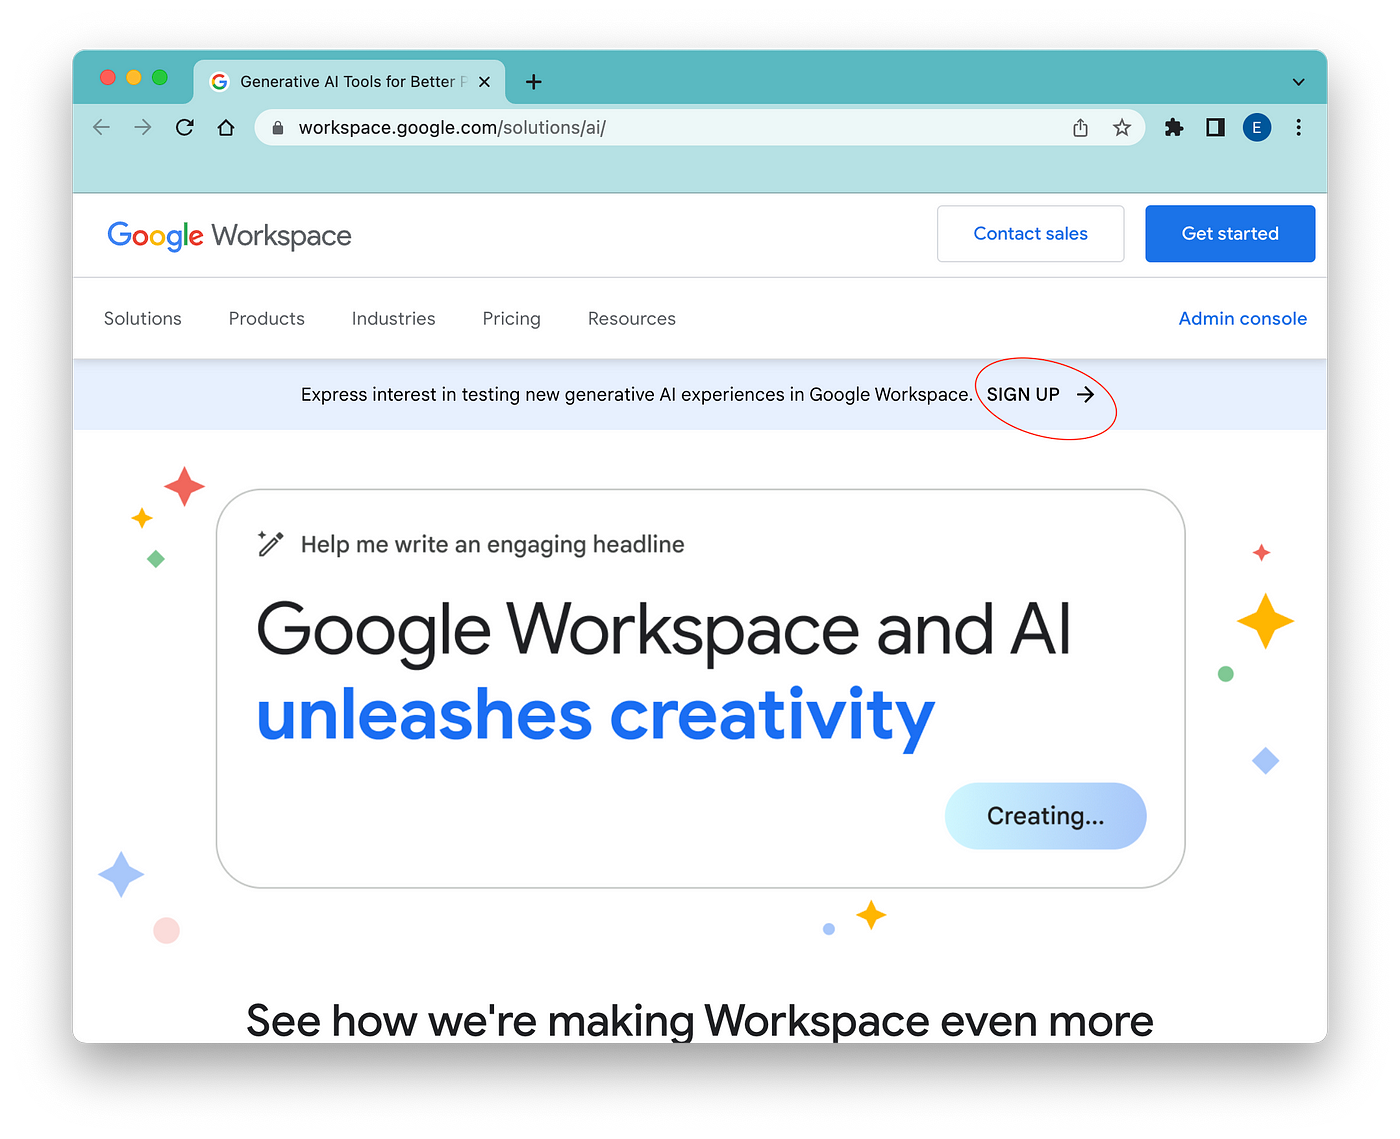 Gmail will help you write your emails now: How to access Google's new AI  tool